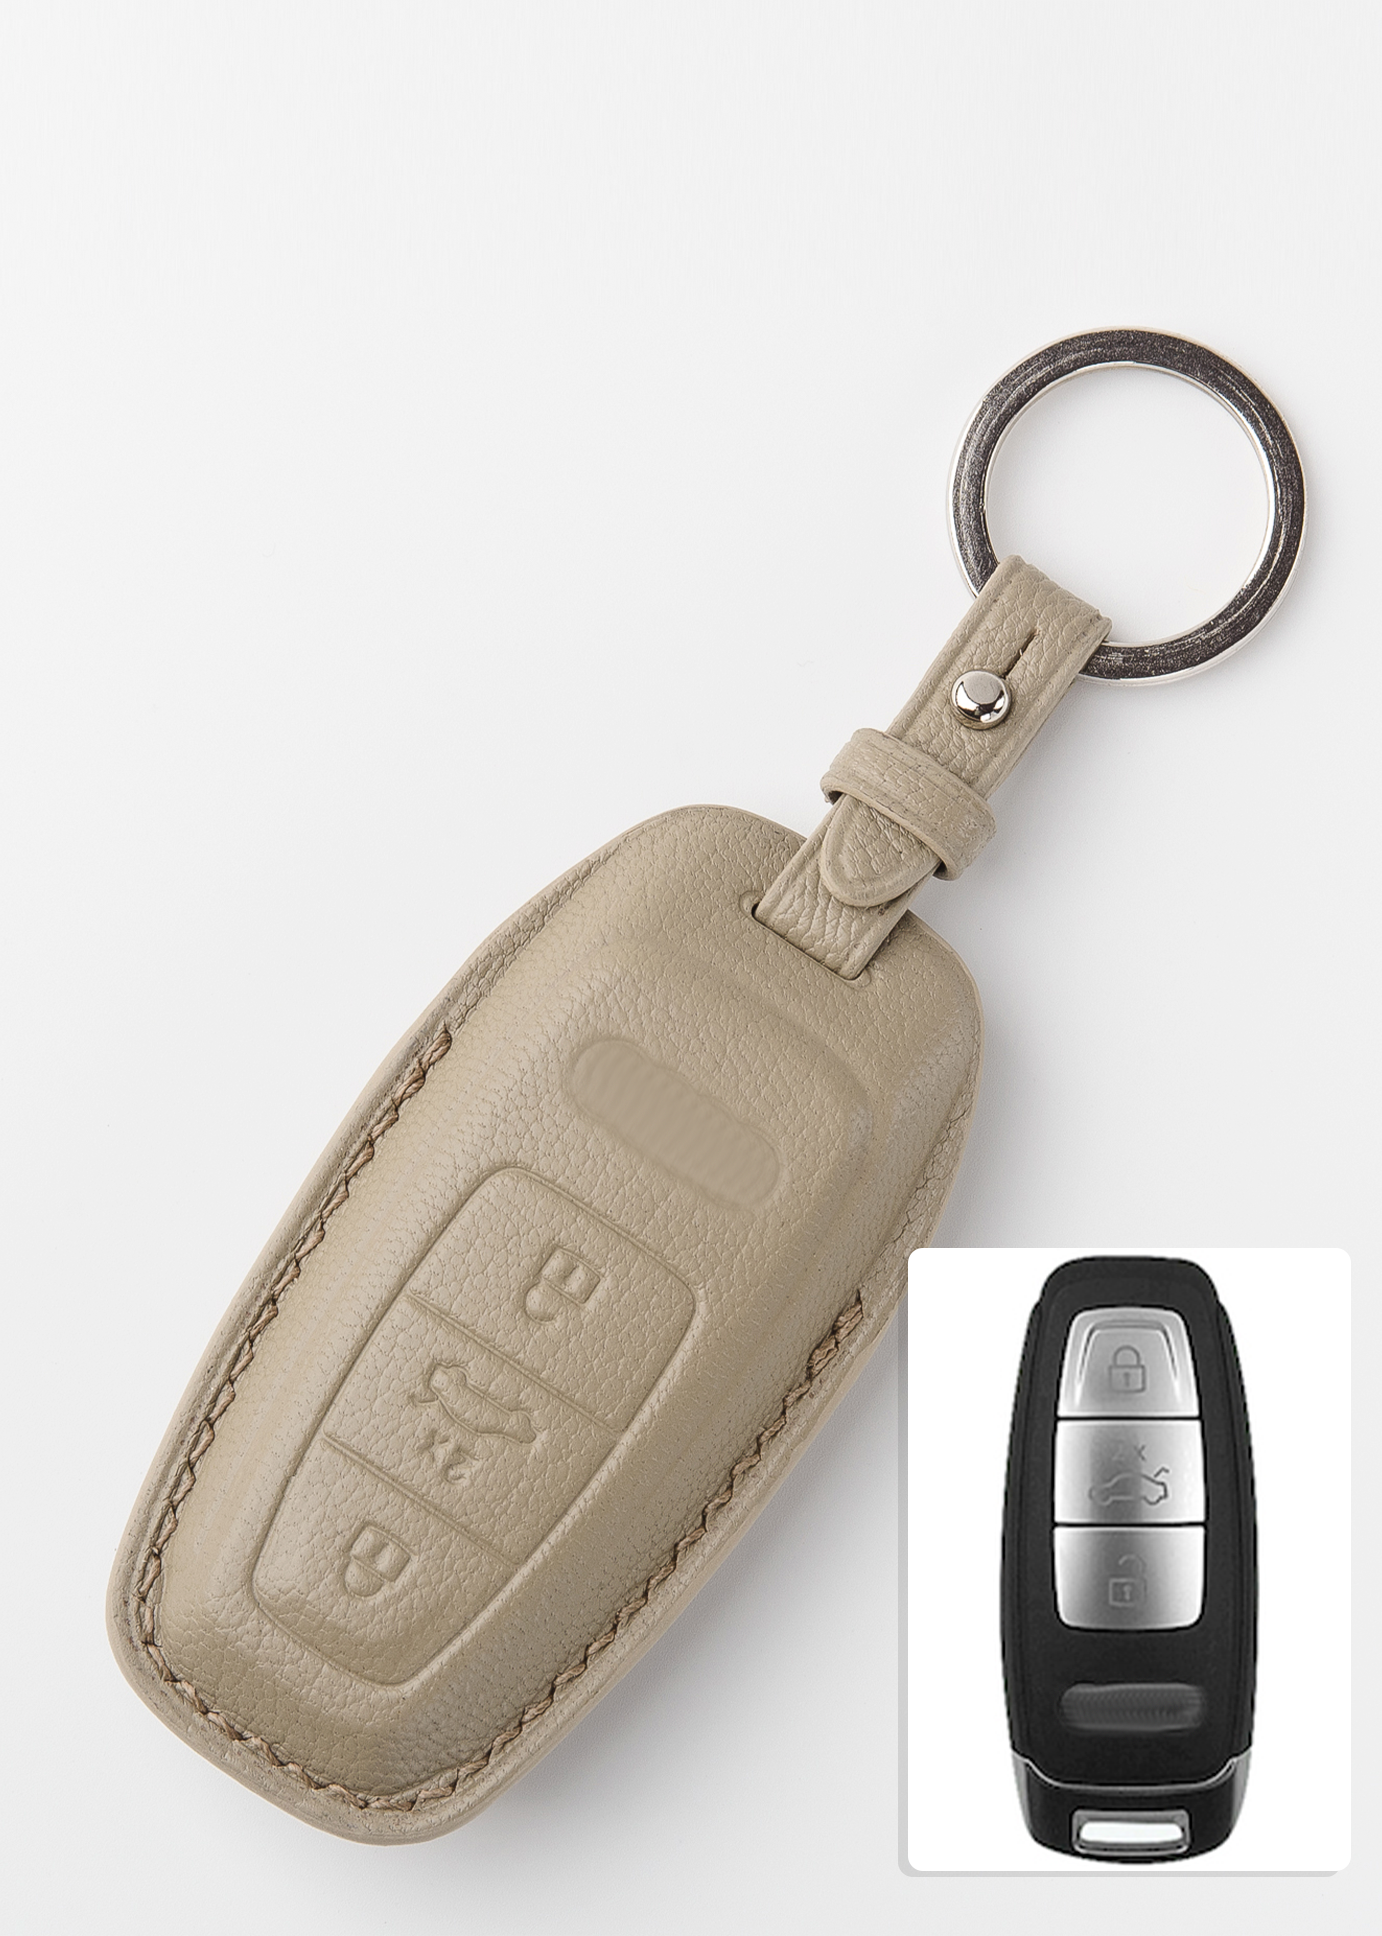 Timotheus for Audi key fob cover case, Compatible with Audi key case